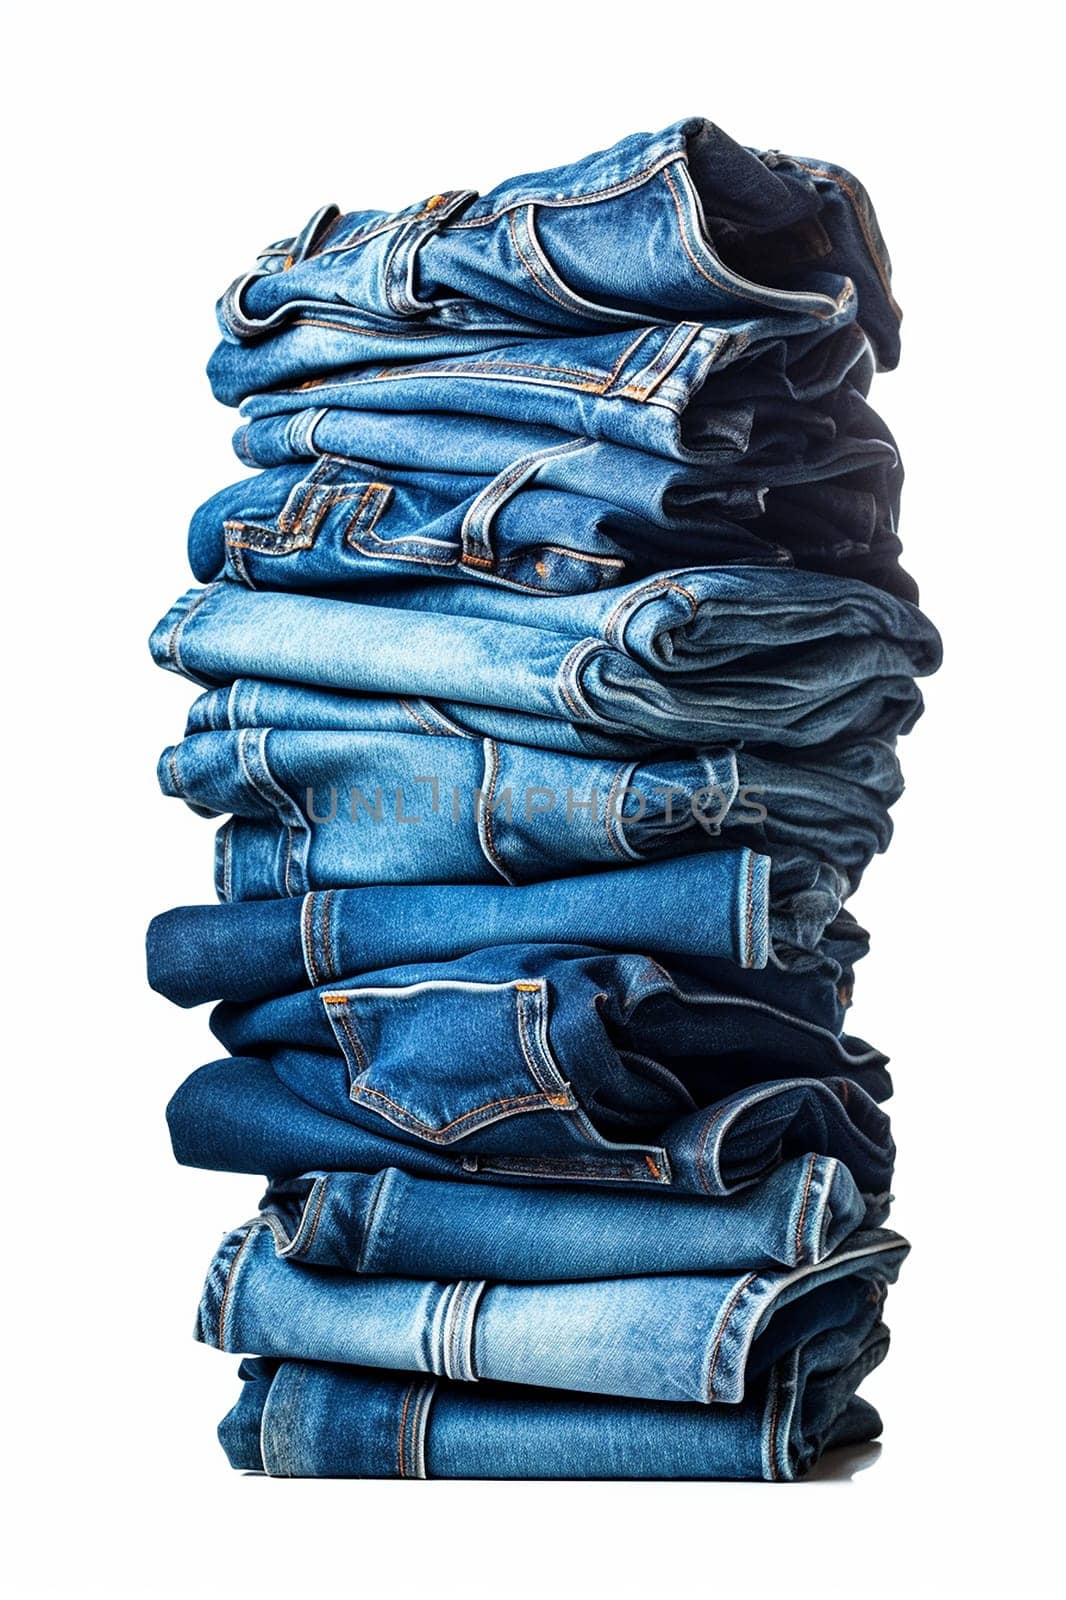 Stack of various blue denim jeans isolated on white.